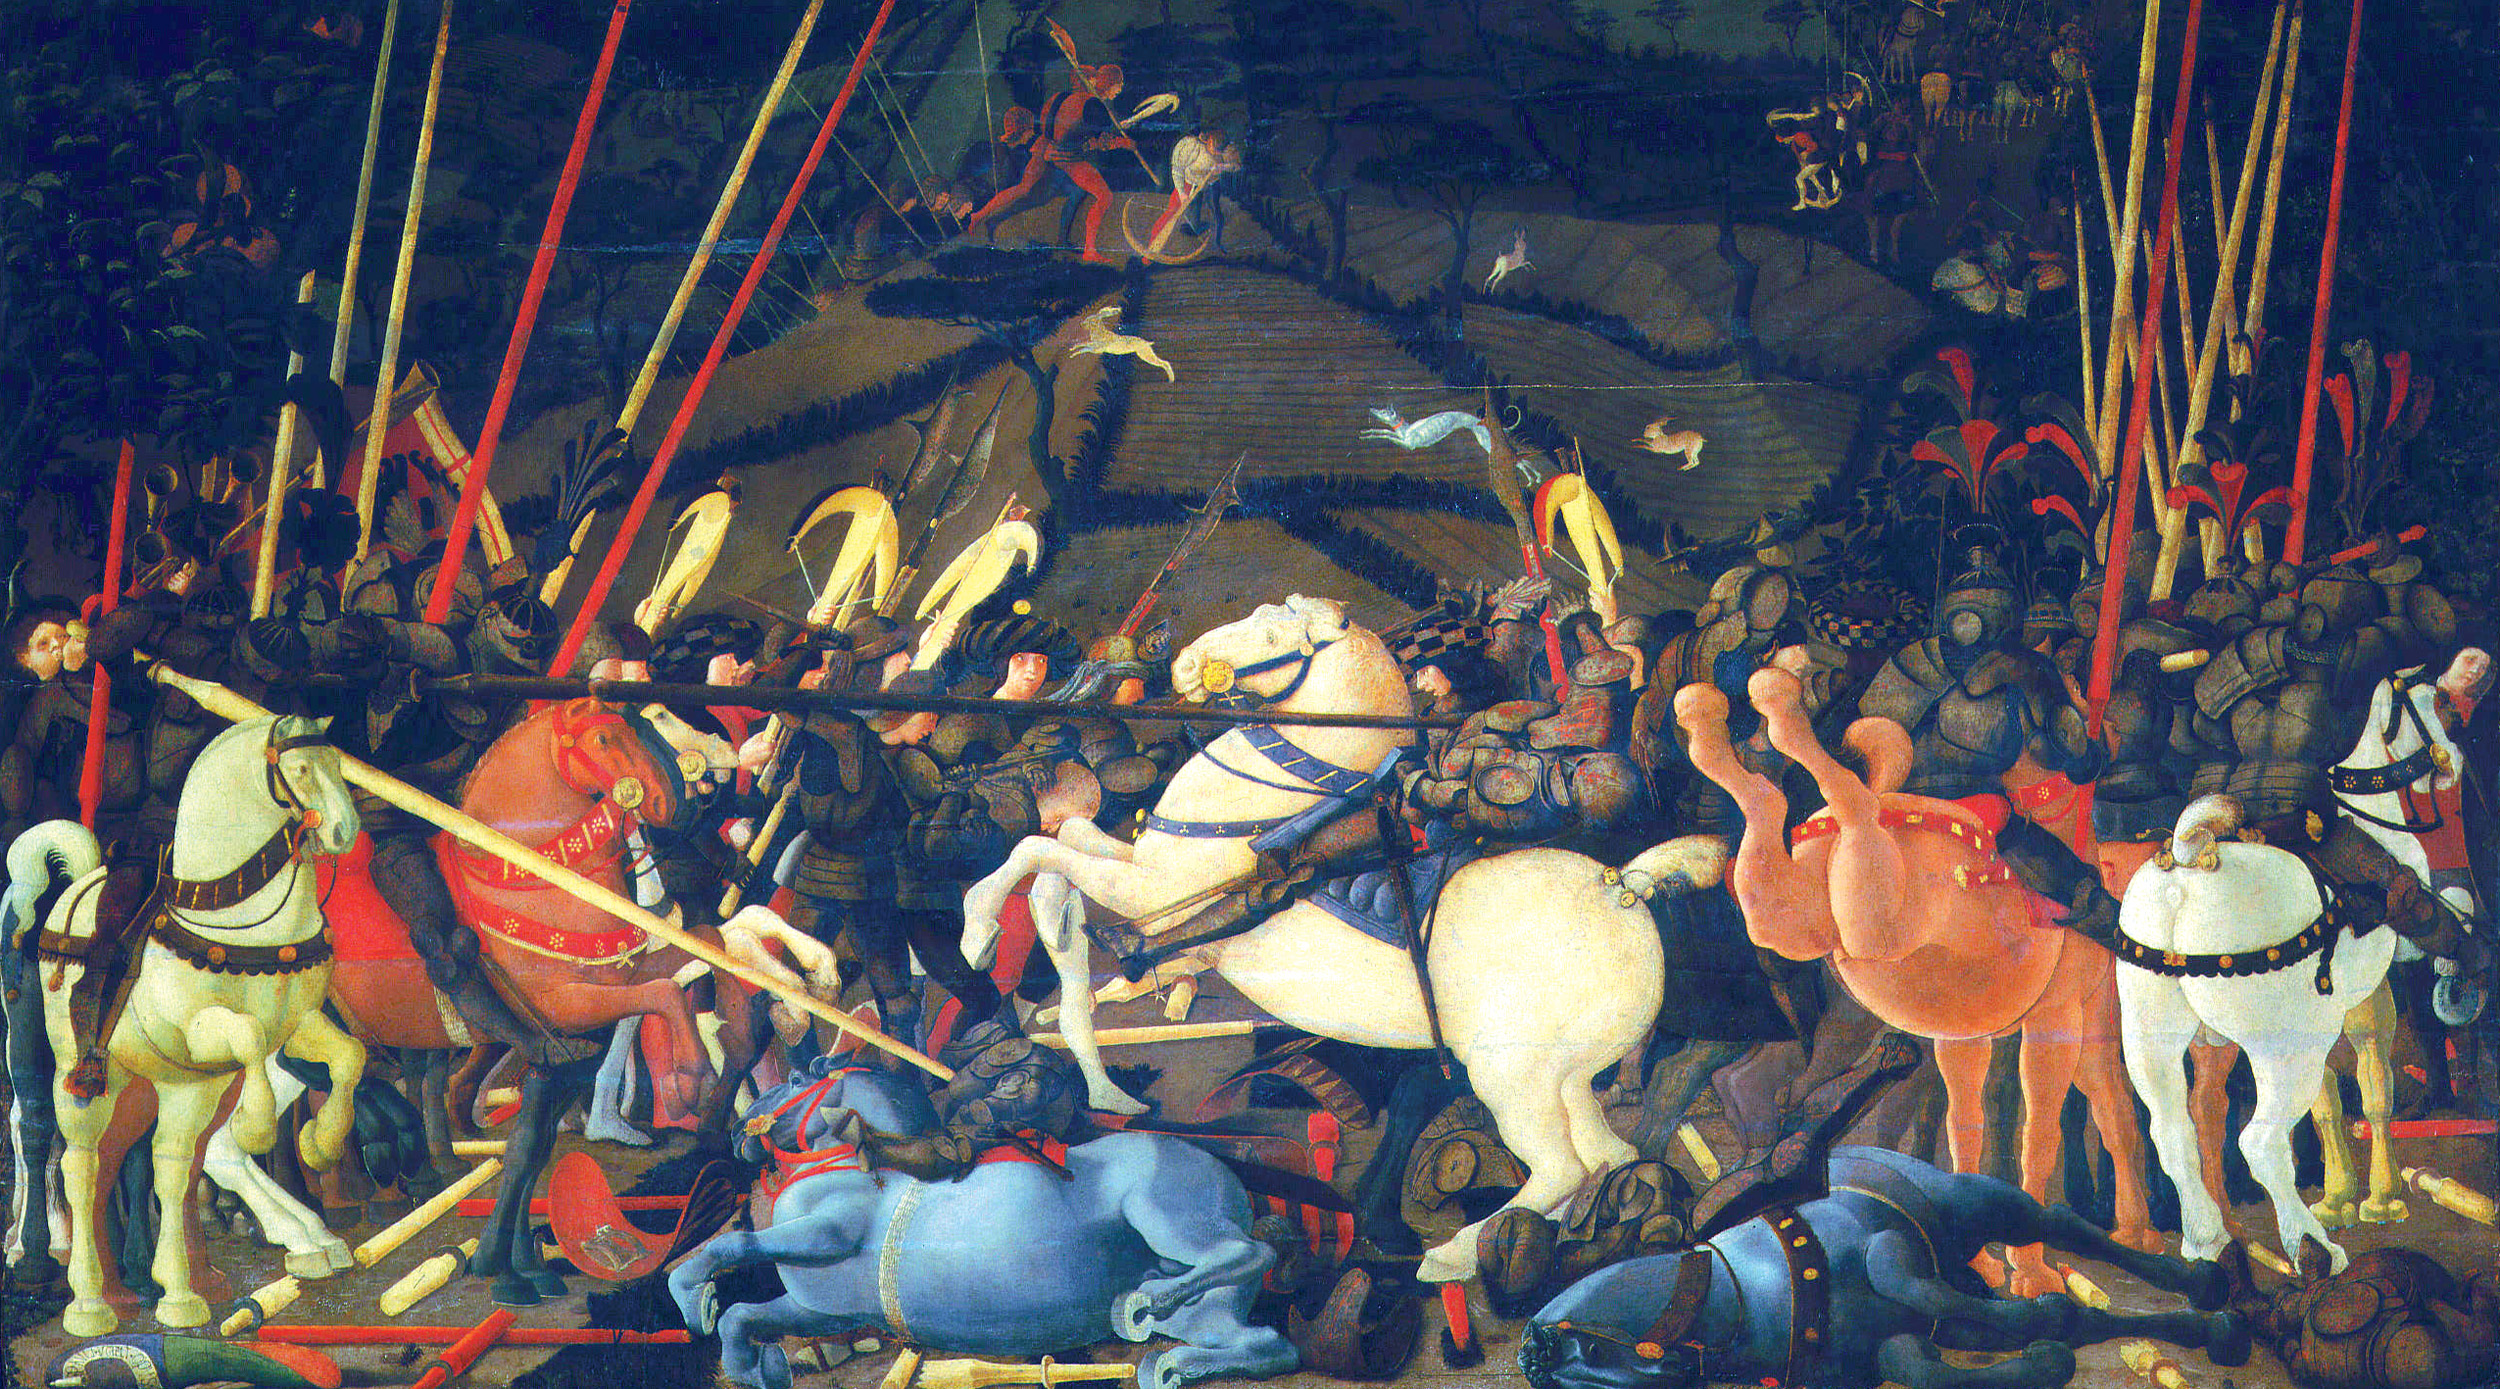 Early 15th-century Italy was a caldron of warfare from which mercenaries like Bartolomeo Colleoni could make a name and a fortune. Below is a 1432 battle between Florentines and Sienese.